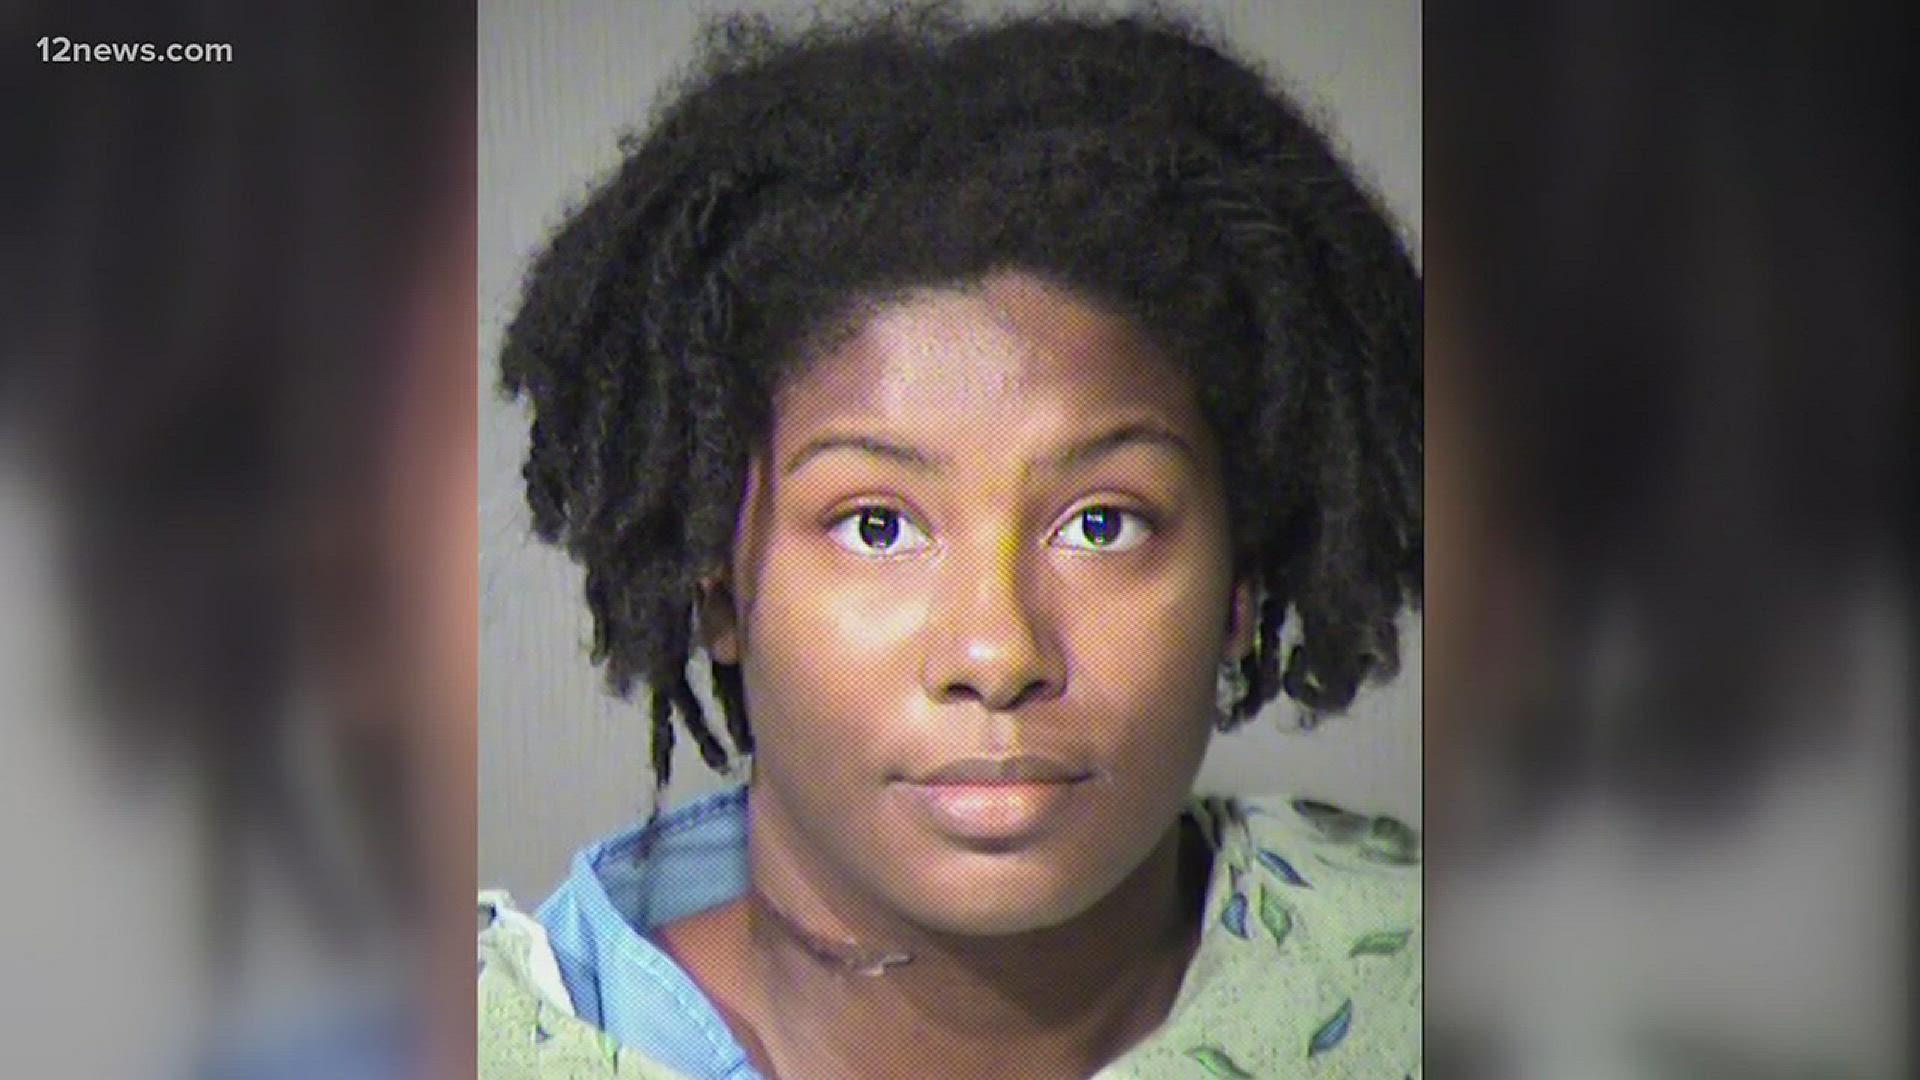 Zynia Chapman was arrested on the Loop 101 overpass suspected of stabbing her boyfriends to death, according to police.